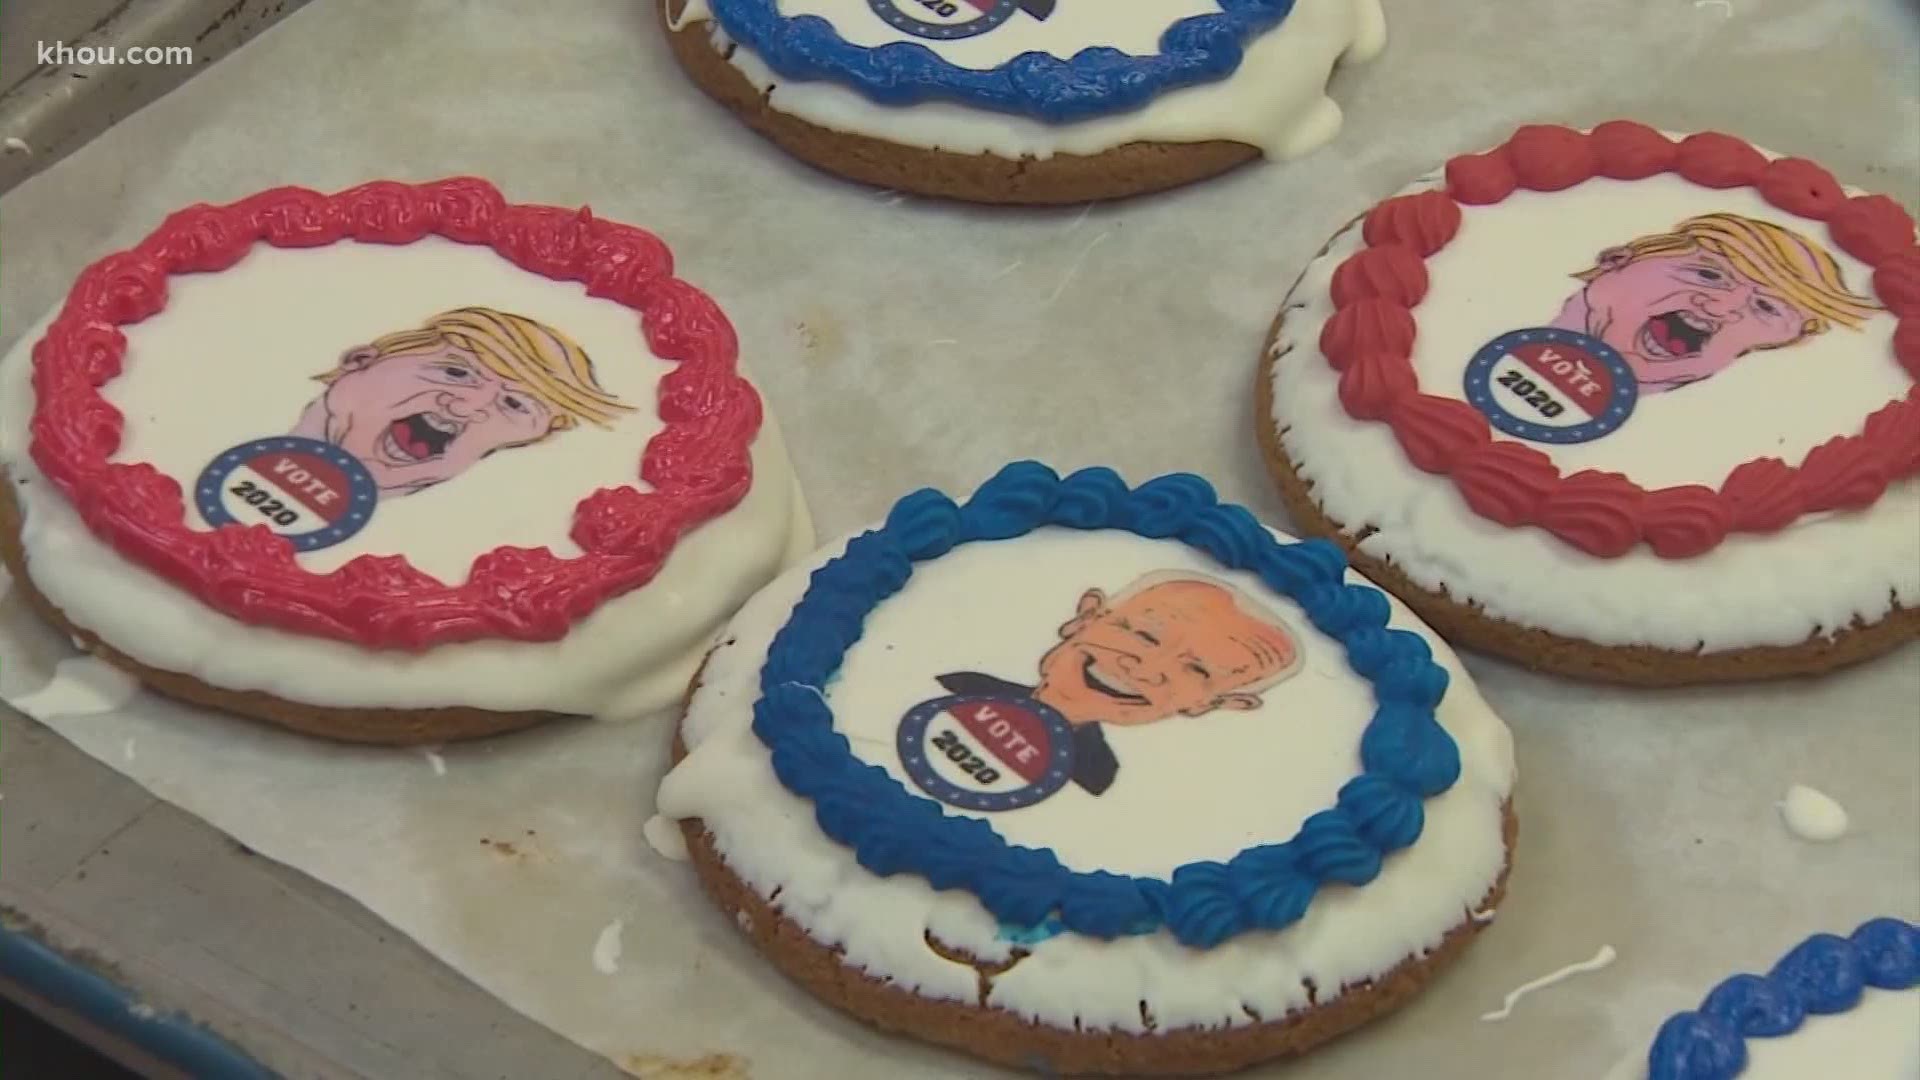 Right now, the Three Brothers Bakery cookie poll has President Donald Trump in the lead over Joe Biden with a week to go until Election Day.